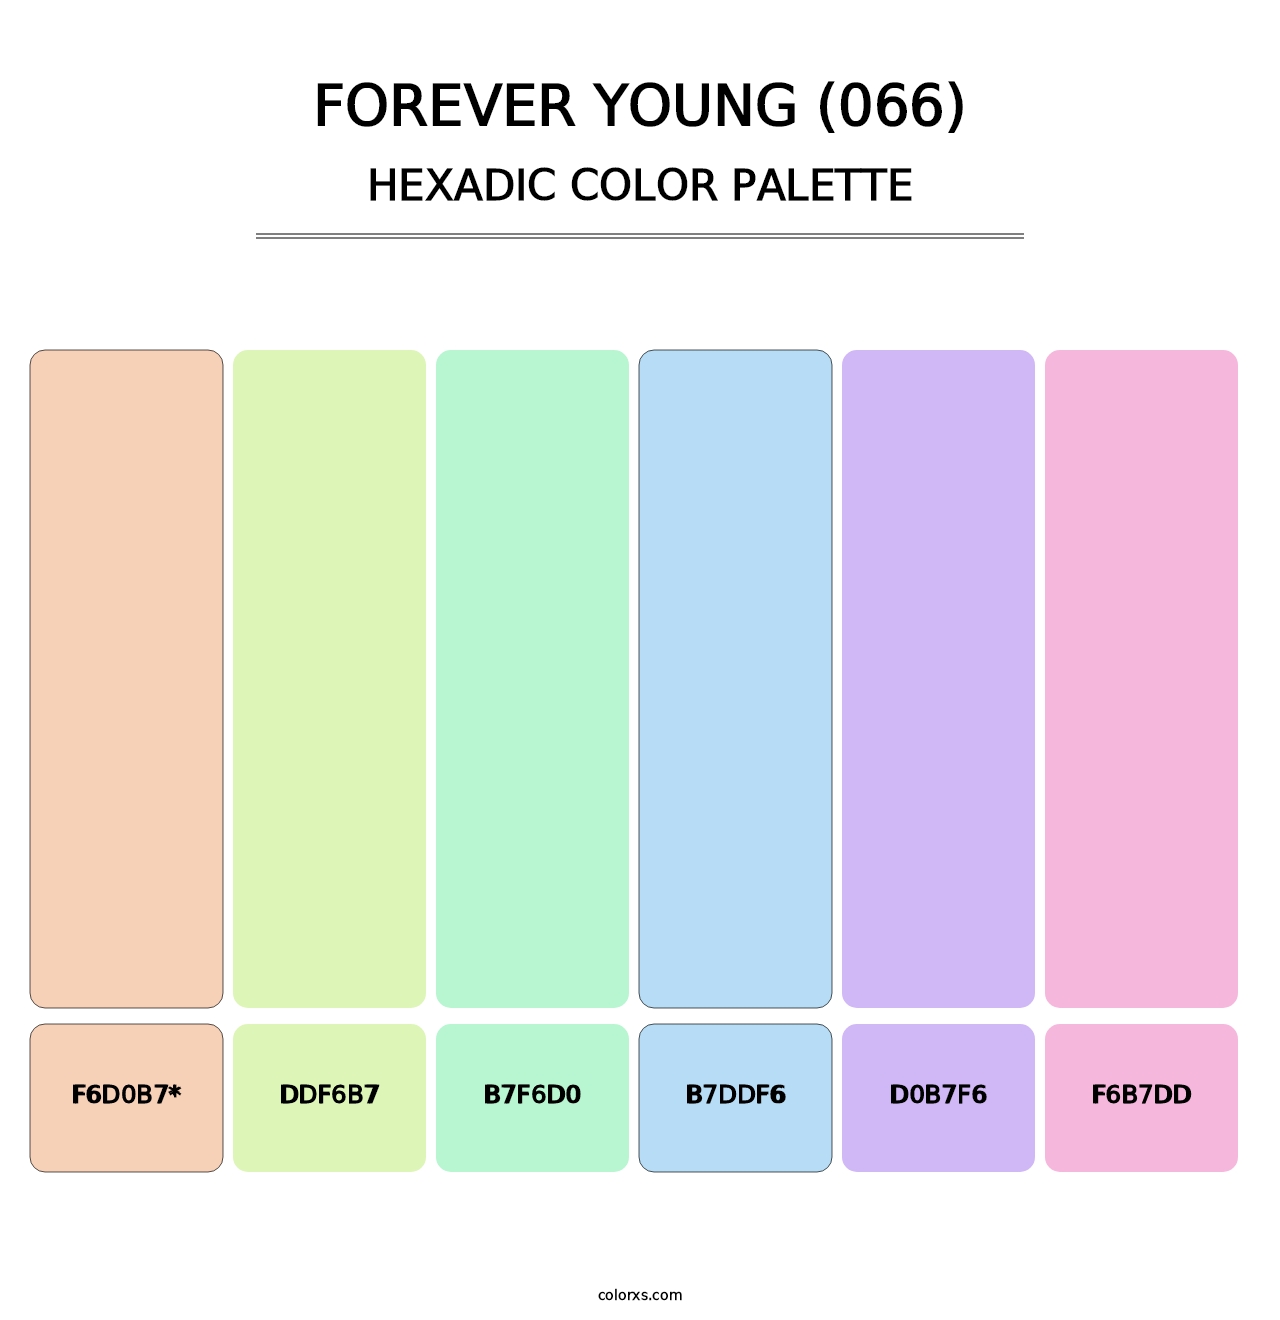 Forever Young (066) - Hexadic Color Palette